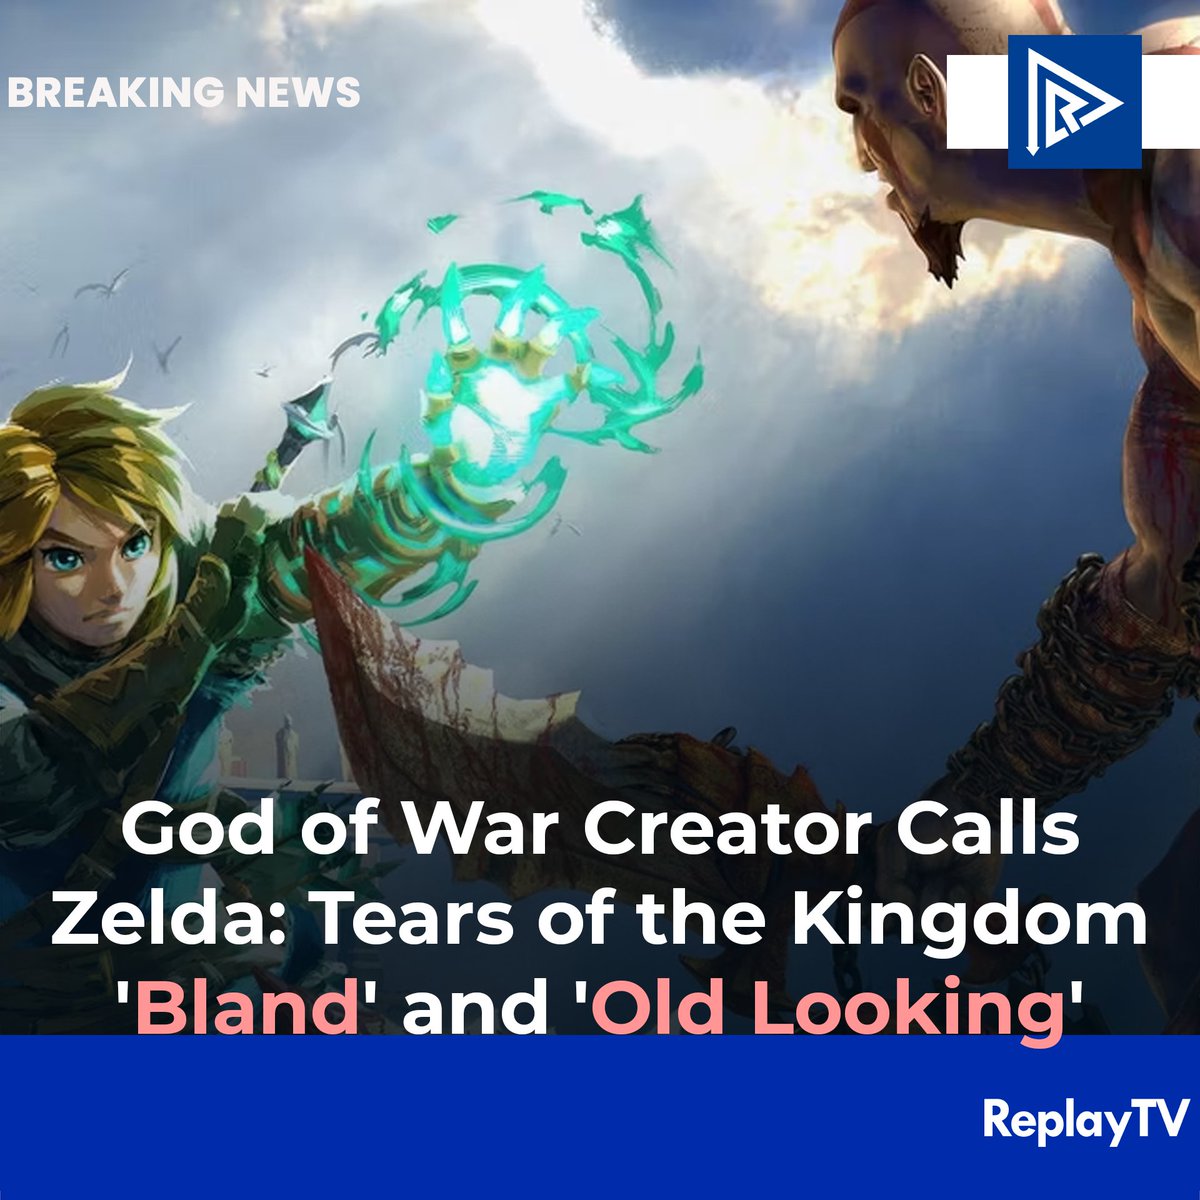 🎮 Game creator David Jaffe slams The Legend of Zelda: Tears of the Kingdom as 'bland' and 'old looking.' Is it really? 😯 #GamingCritique #ControversialOpinions #LegendofZelda